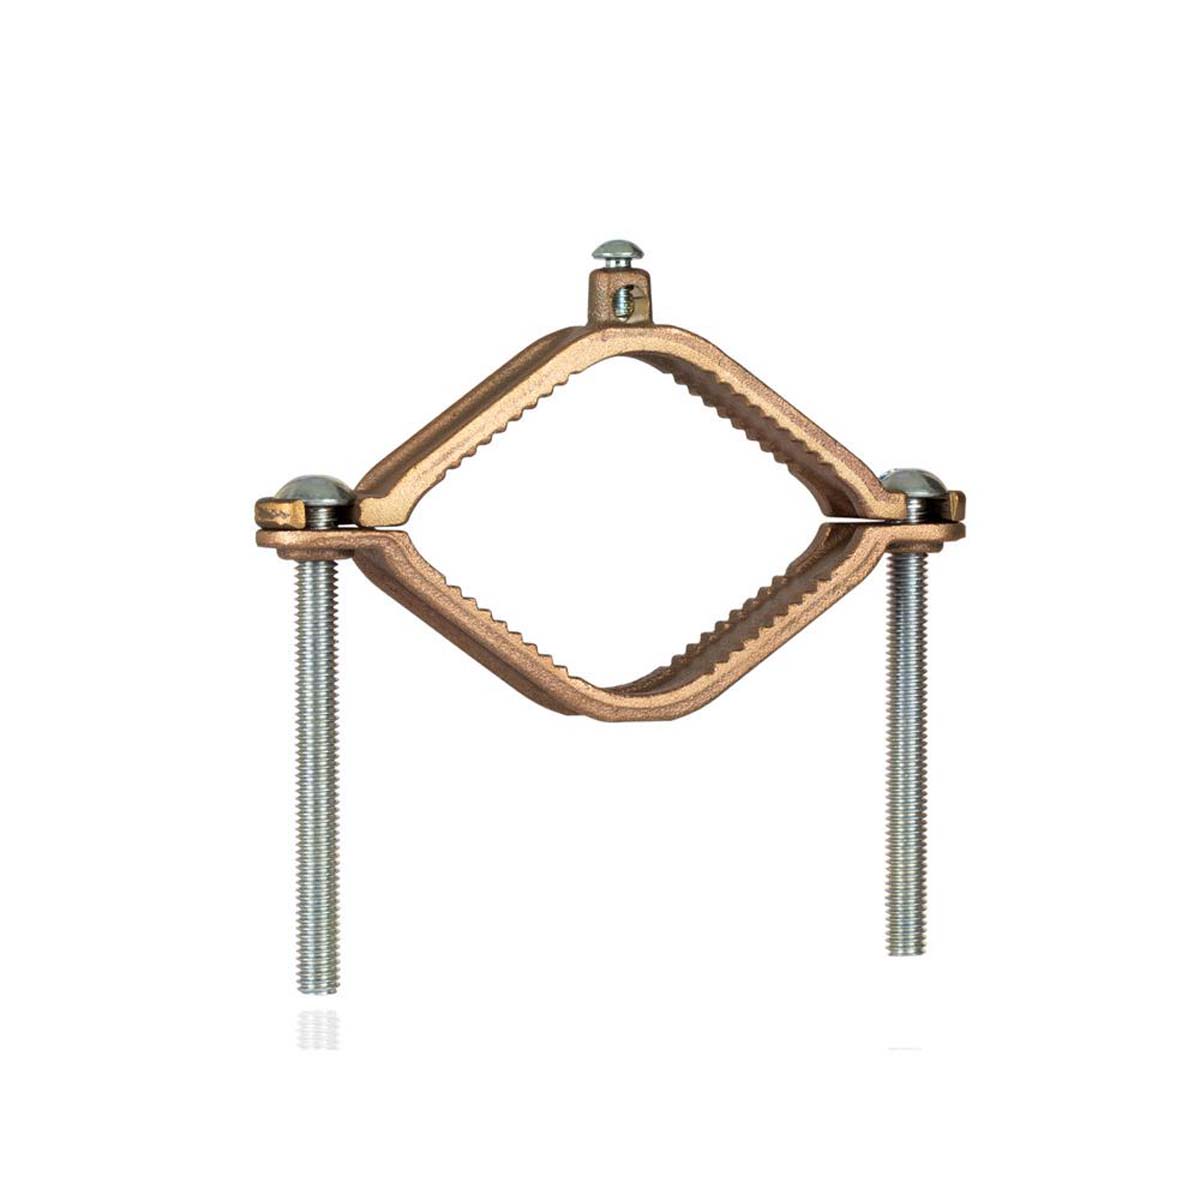 Bronze Grounding Clamp CWP2J C-22 10-2 Wire 1-1/4"-2" Water Pipe BF 1-1/2-21/8 